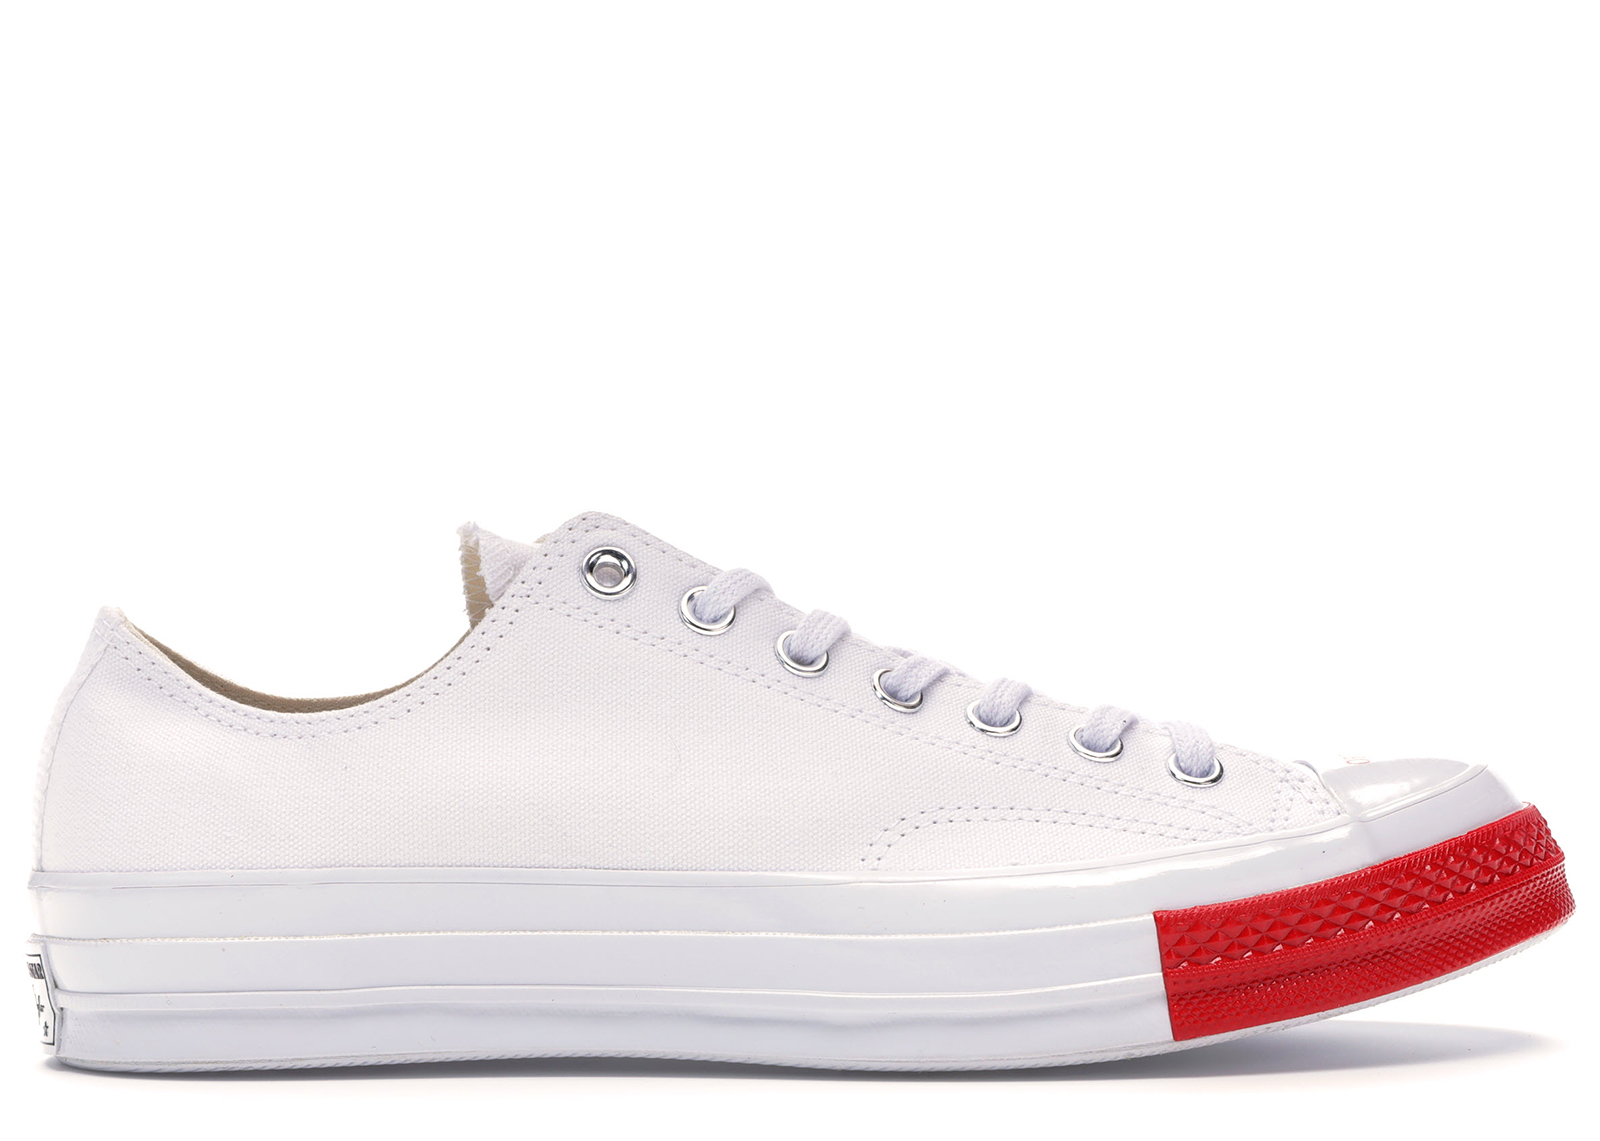 Converse Chuck Taylor All Star 70 Ox Undercover White メンズ ...